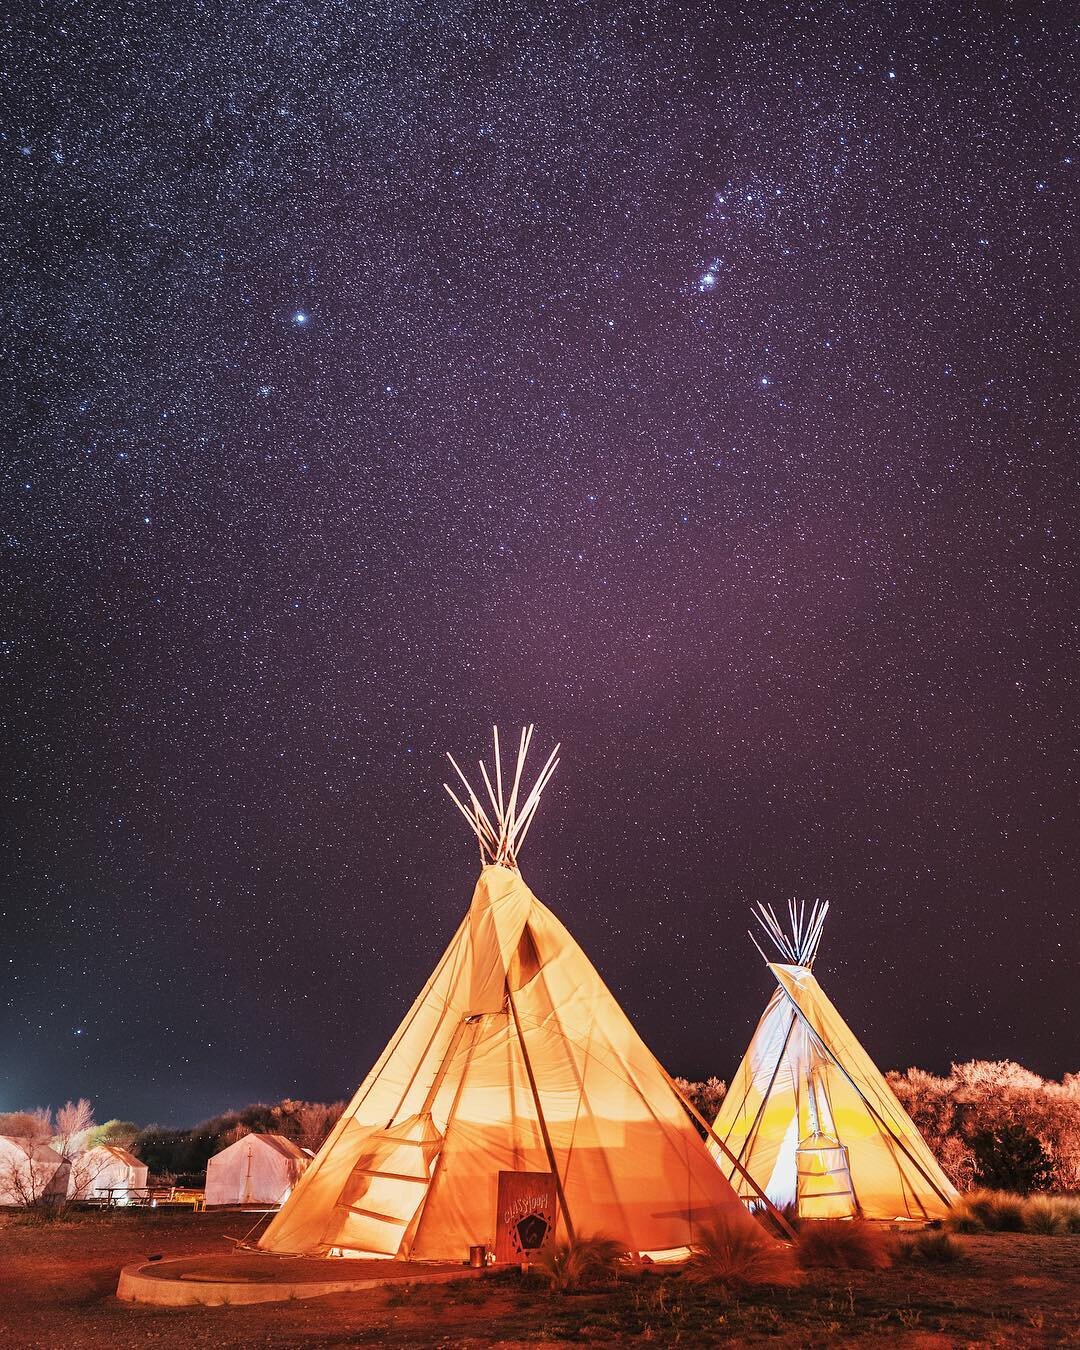 El Cosmico Marfa teepees at night // Unique Texas Getaways: The Coolest and Quirkiest Places to Stay in TX